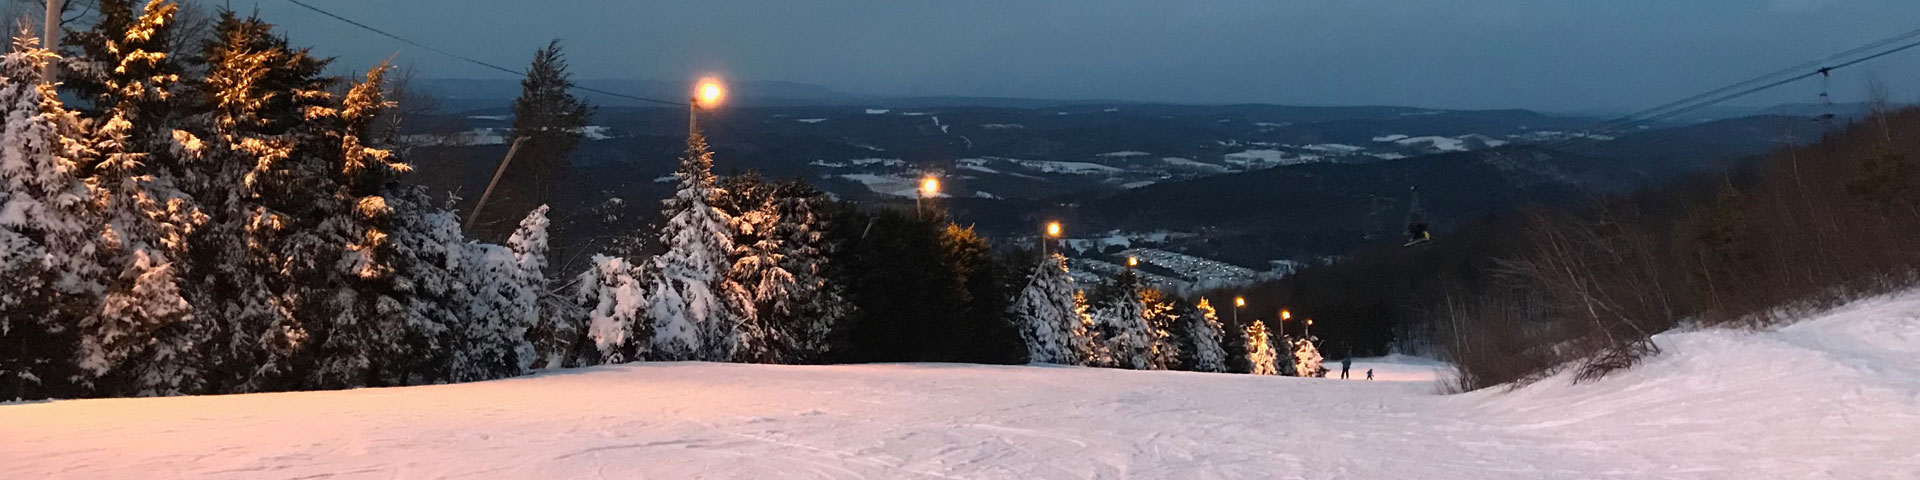 A view from the top of a ski sloop. The hills of Pennsylvania can be seen in the distance.